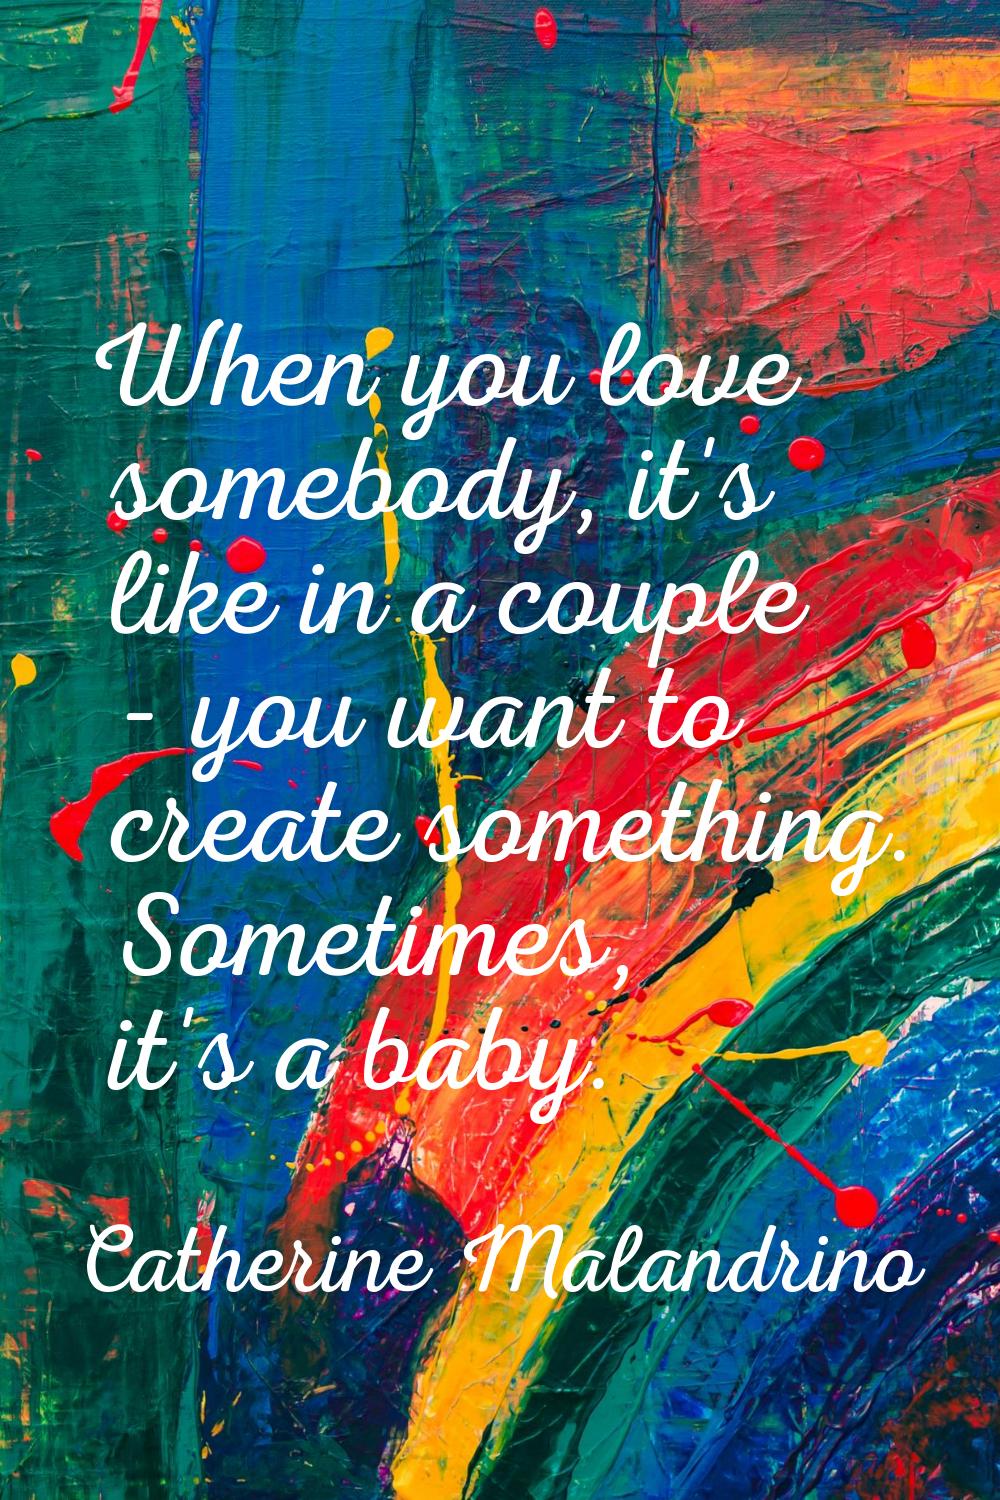 When you love somebody, it's like in a couple - you want to create something. Sometimes, it's a bab